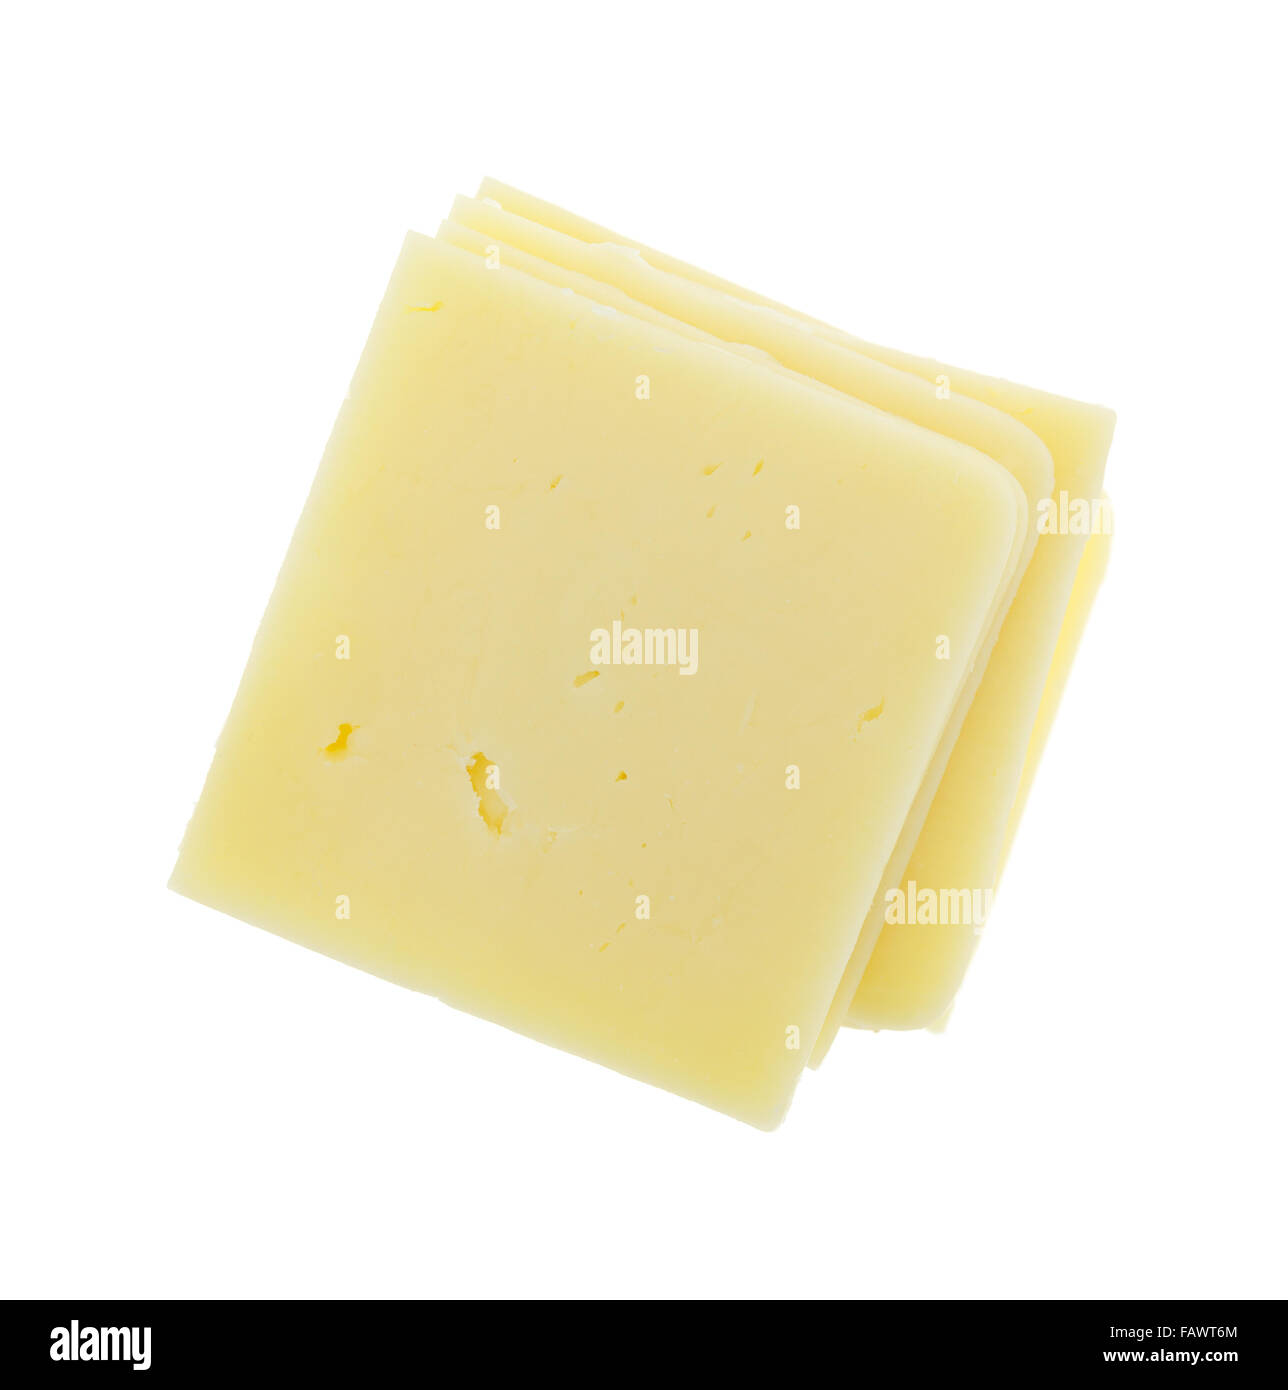 Top view of a stack of square cheddar cheese slices isolated on a white background. Stock Photo